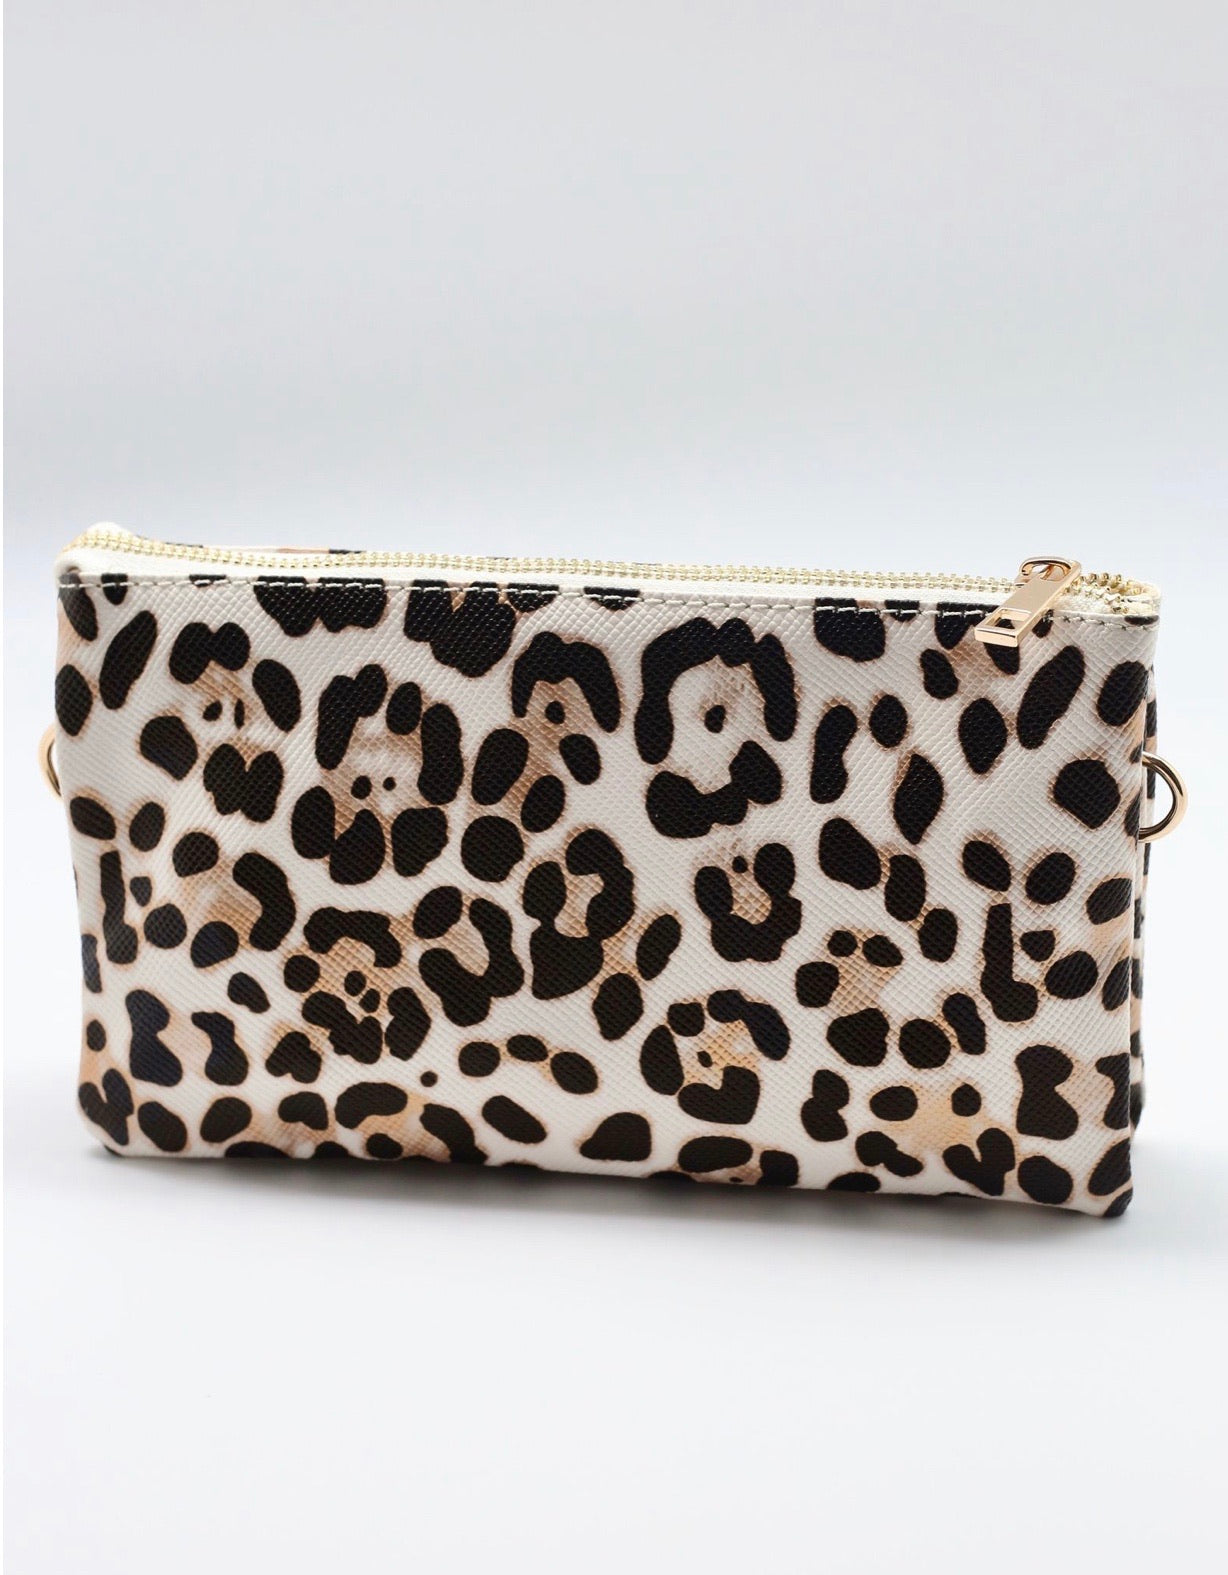 Liz Custom Collection Crossbody Bag Ivory Leopard - Corinne an Affordable Women's Clothing Boutique in the US USA